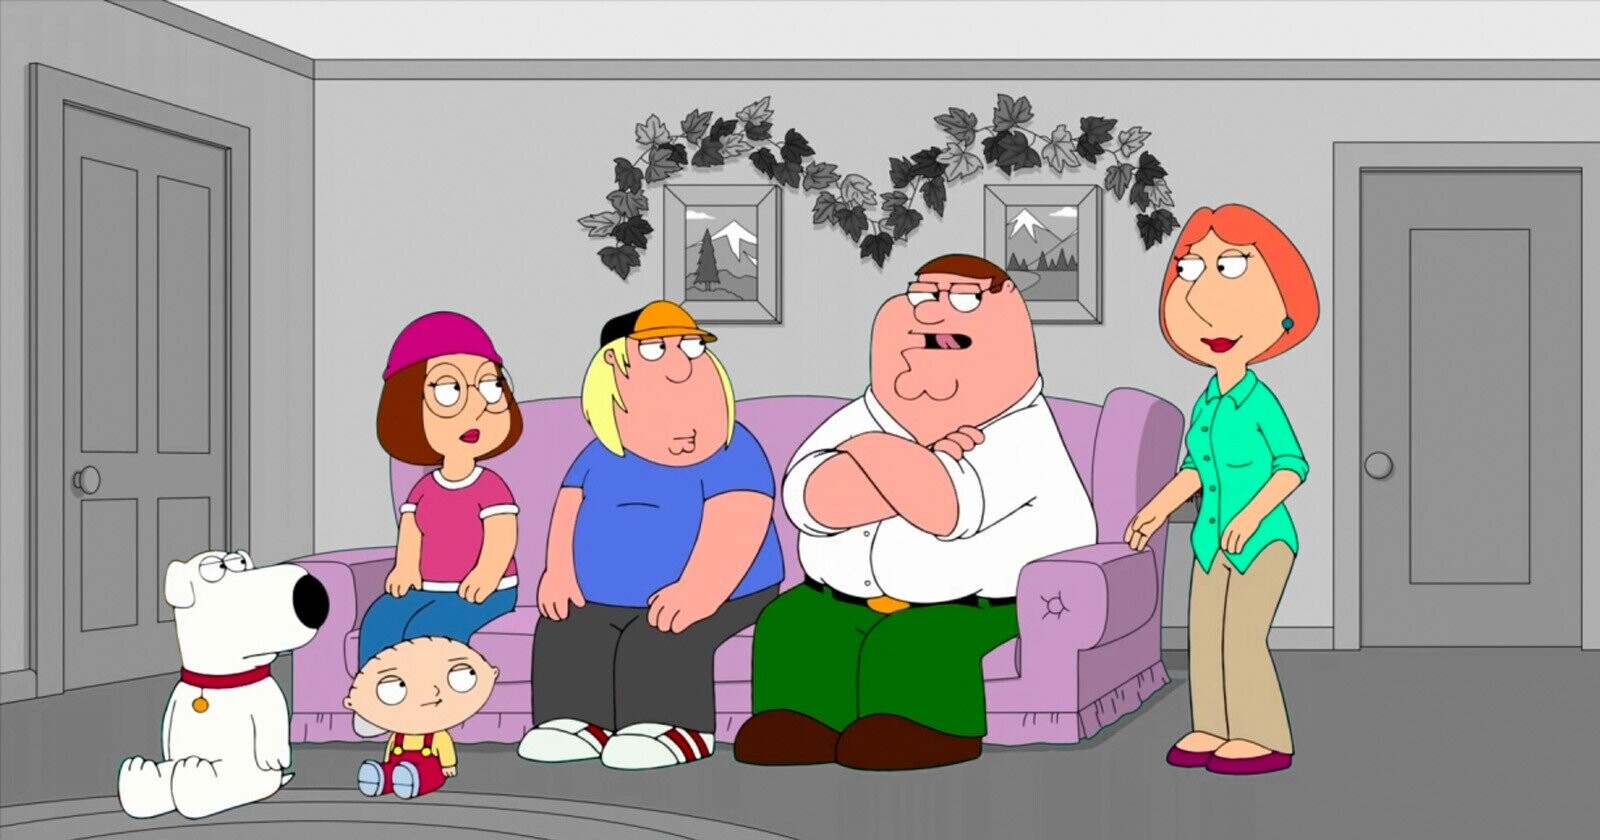 15 Trivia Tidbits About ‘Family Guy’